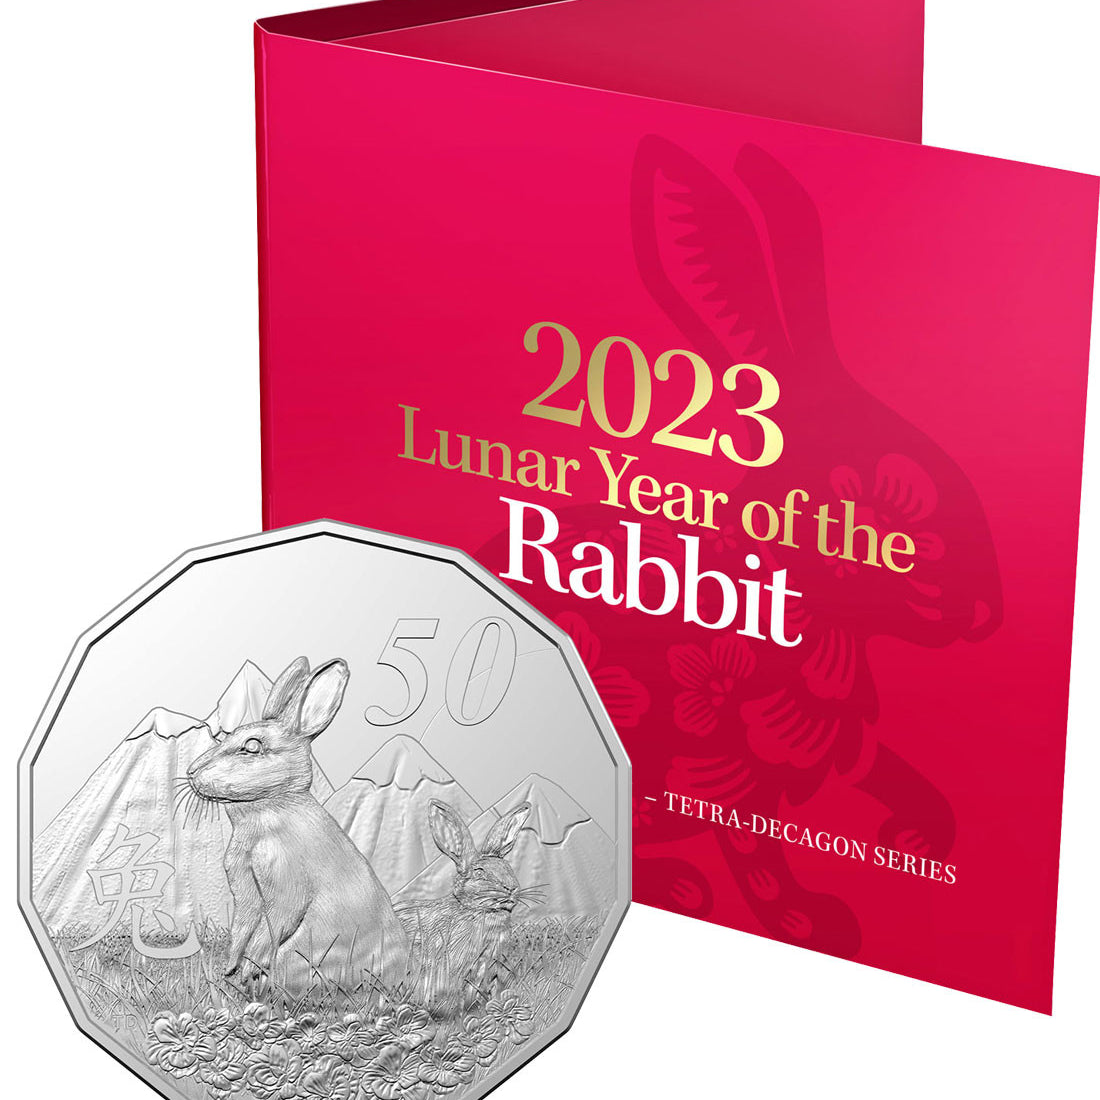 Year of the Rabbit 2023 50c Tetra Decagon Unc Coin